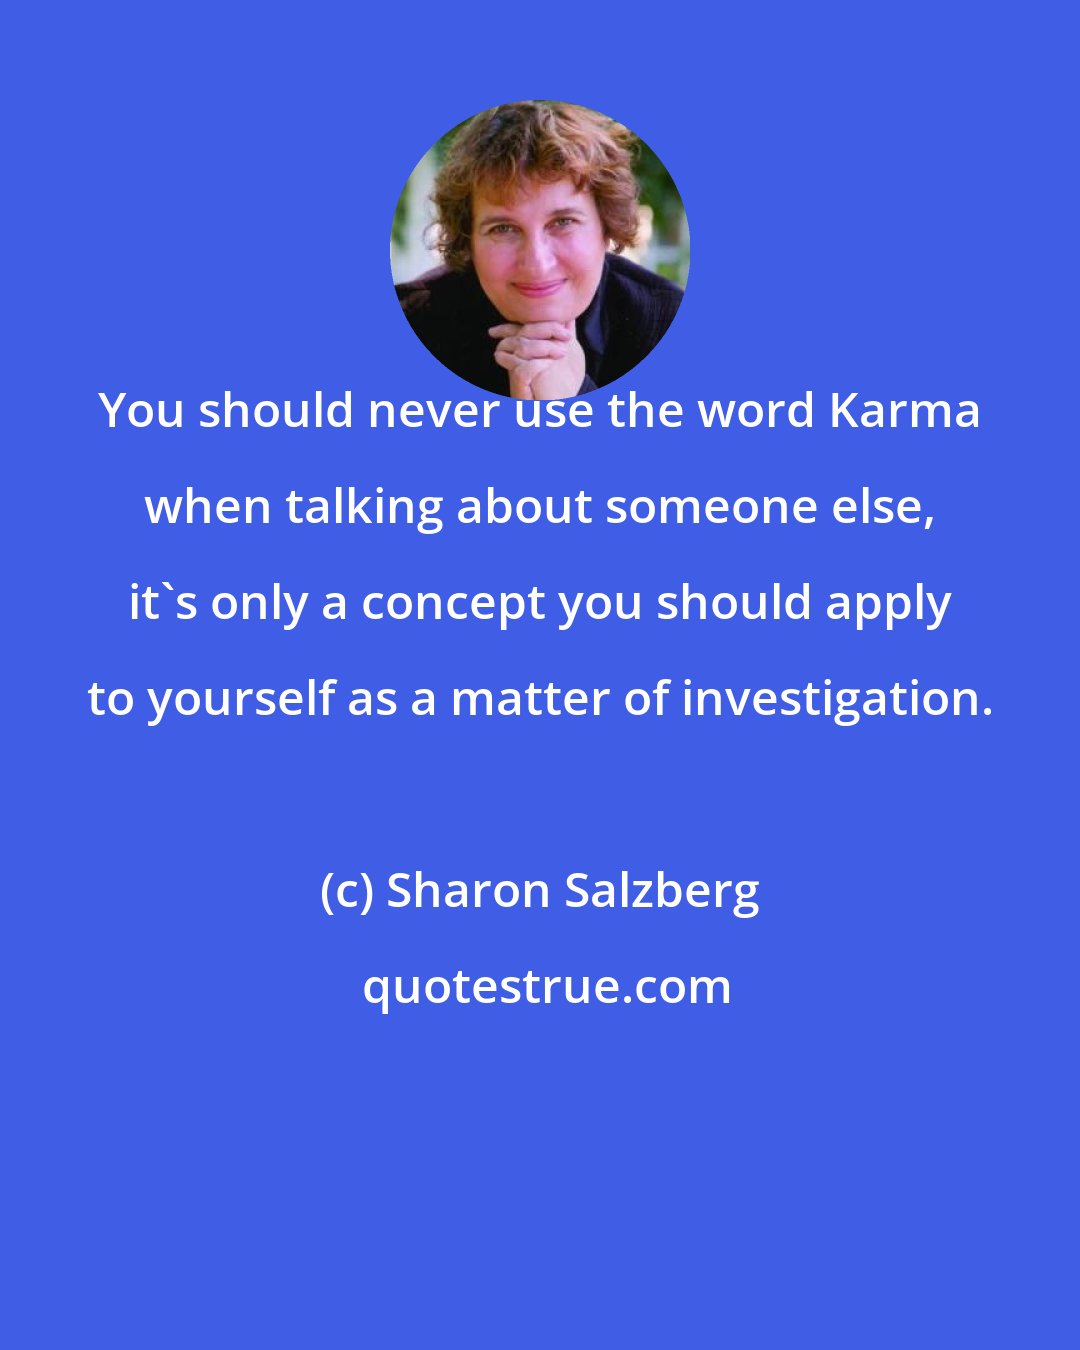 Sharon Salzberg: You should never use the word Karma when talking about someone else, it's only a concept you should apply to yourself as a matter of investigation.